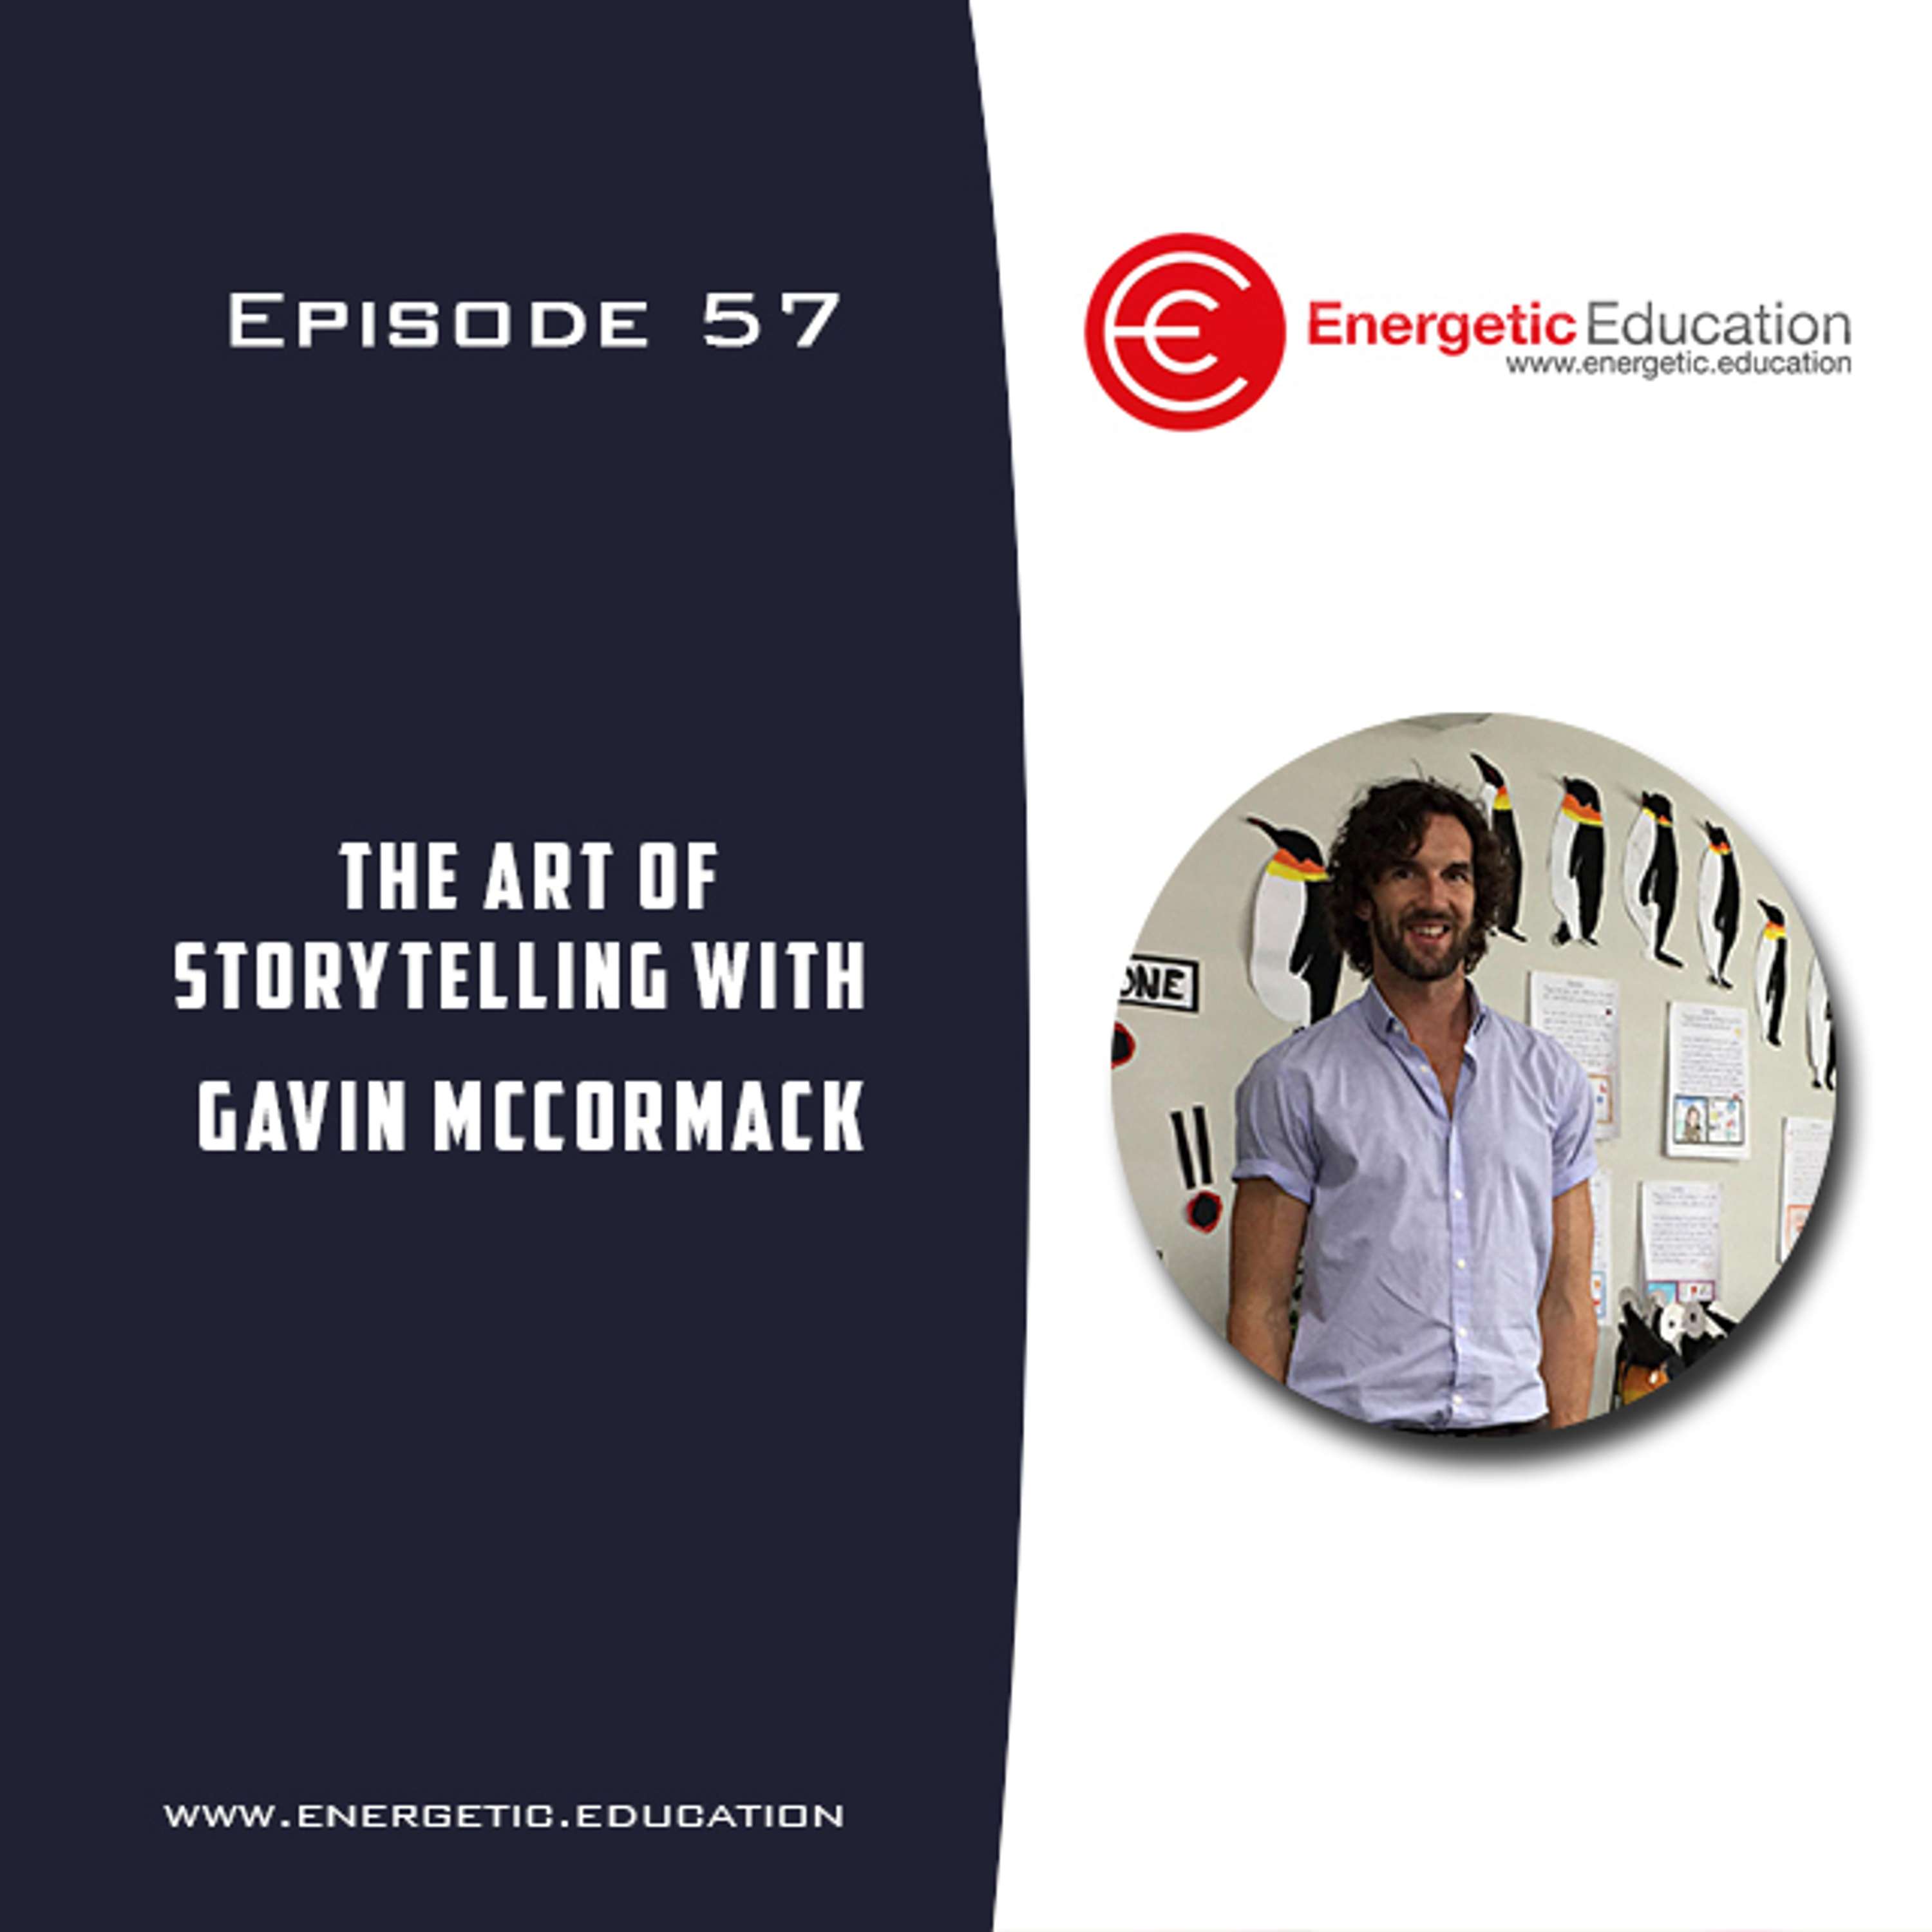 Episode 57 - The art of storytelling with Gavin McCormack